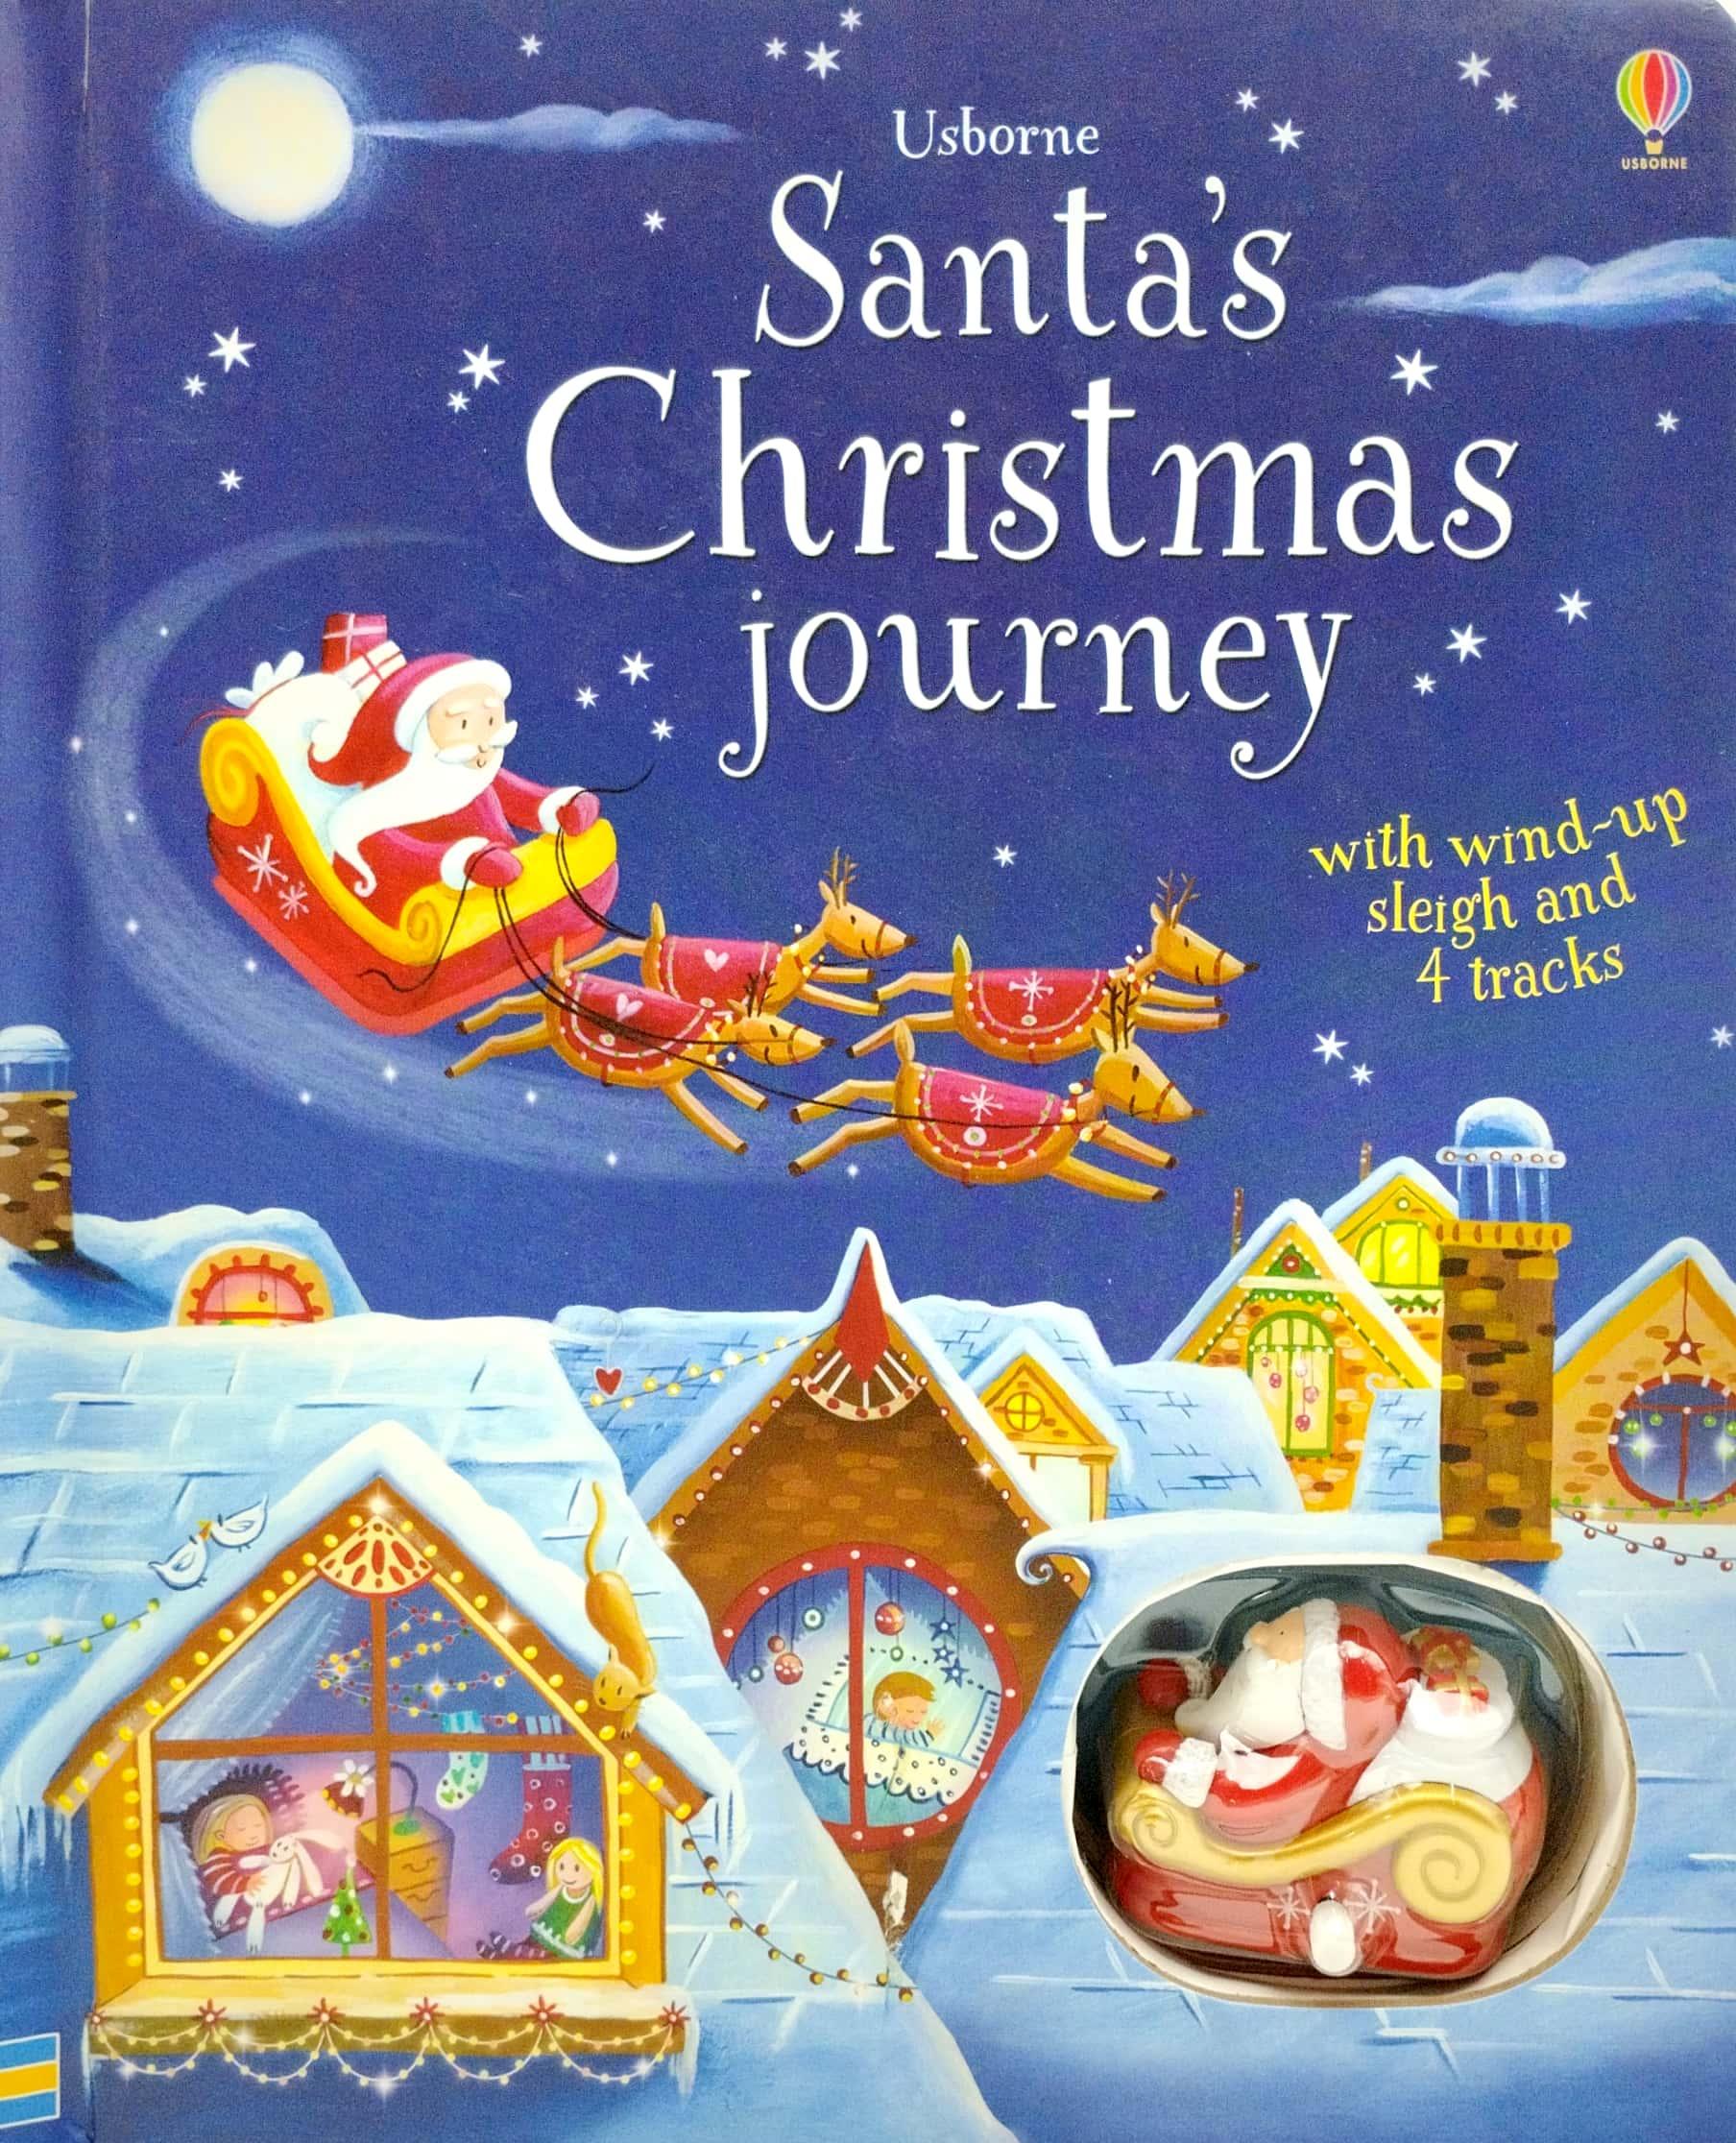 Santa's Christmas Journey with wind-up sleigh